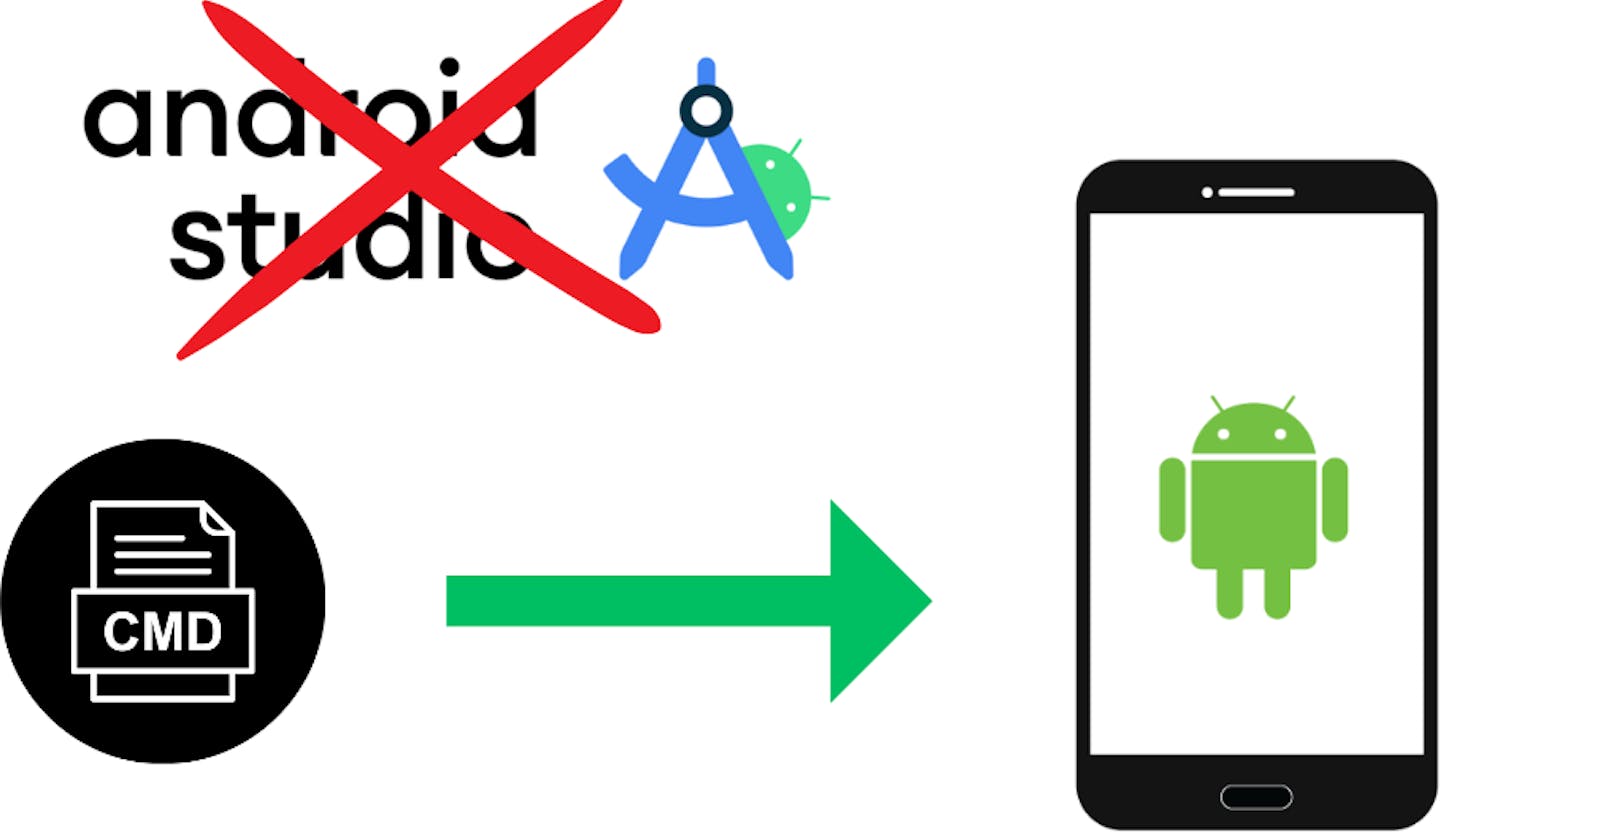 How to open Android Emulator from CMD